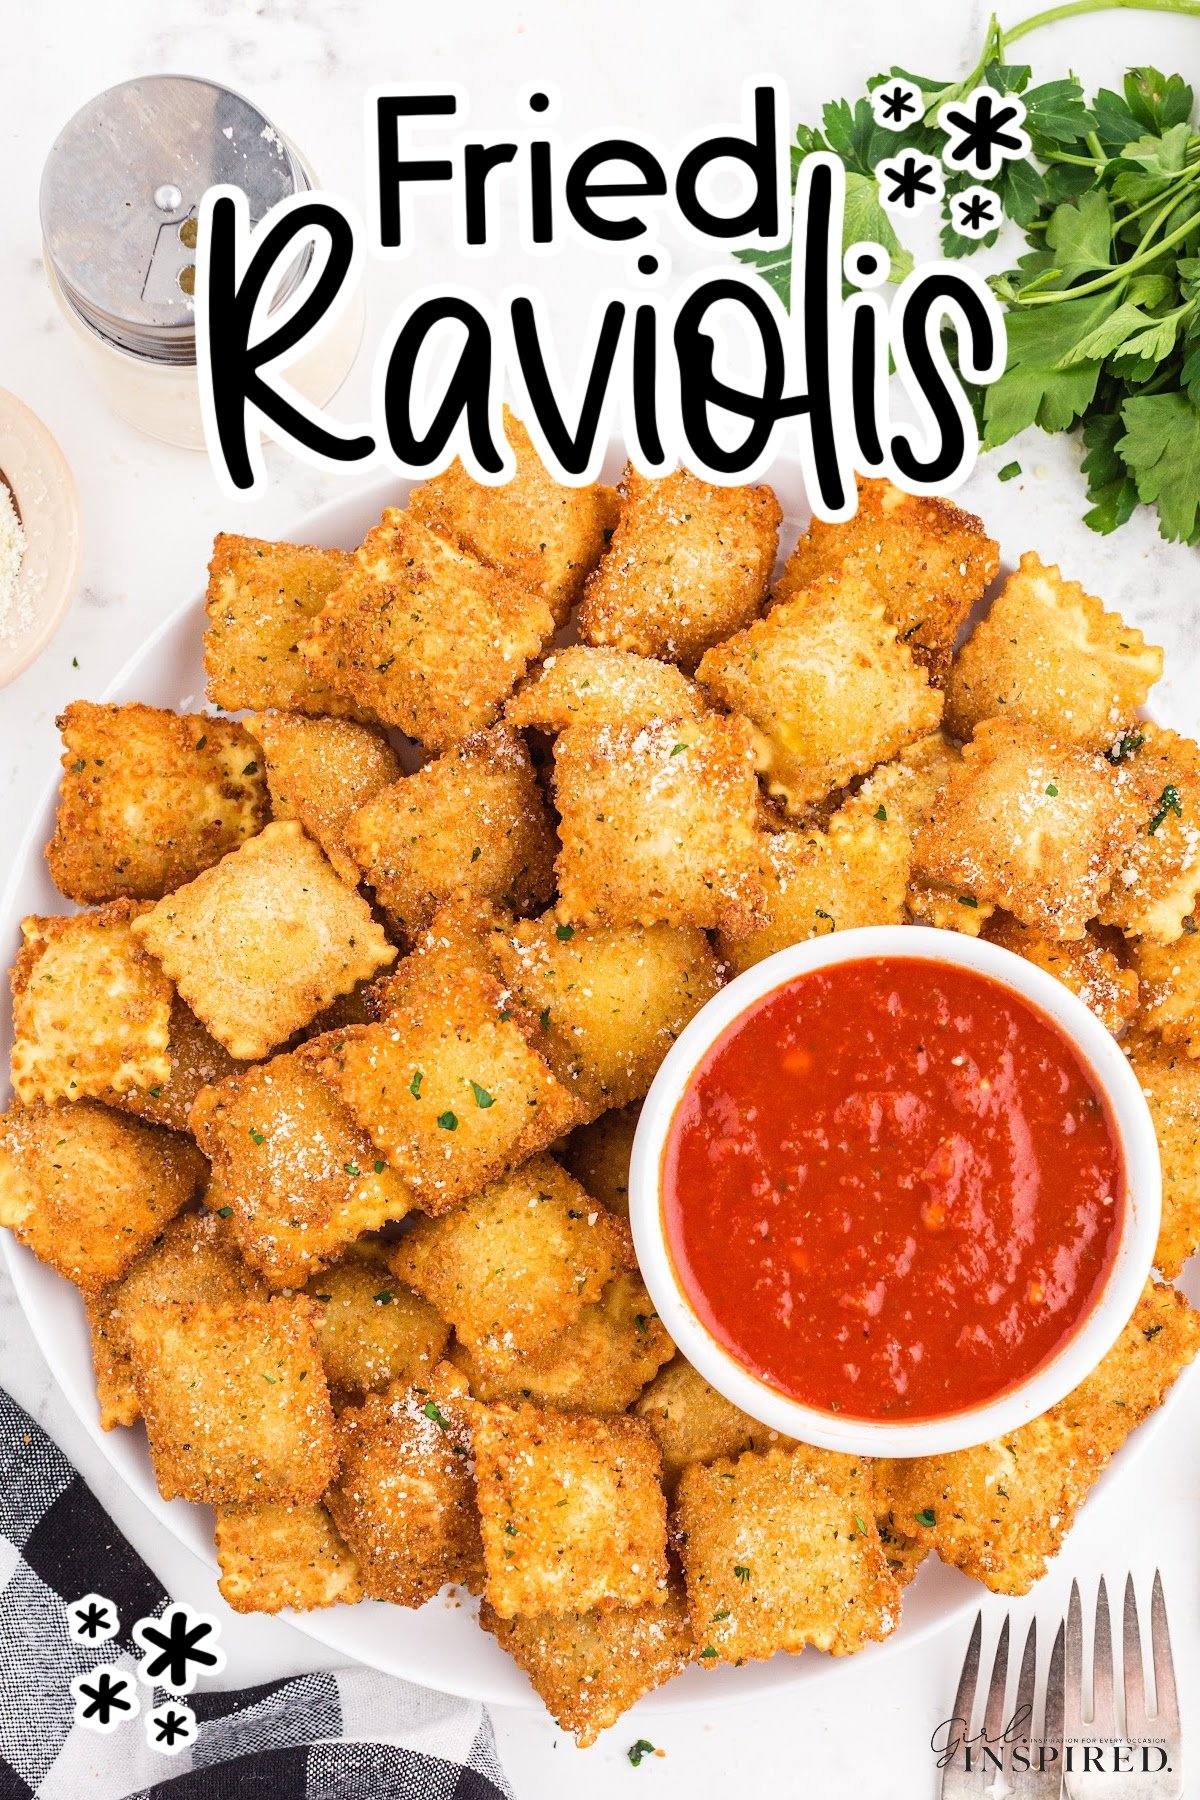 Fried Raviolis on a platter with dipping sauce, and text overlay.